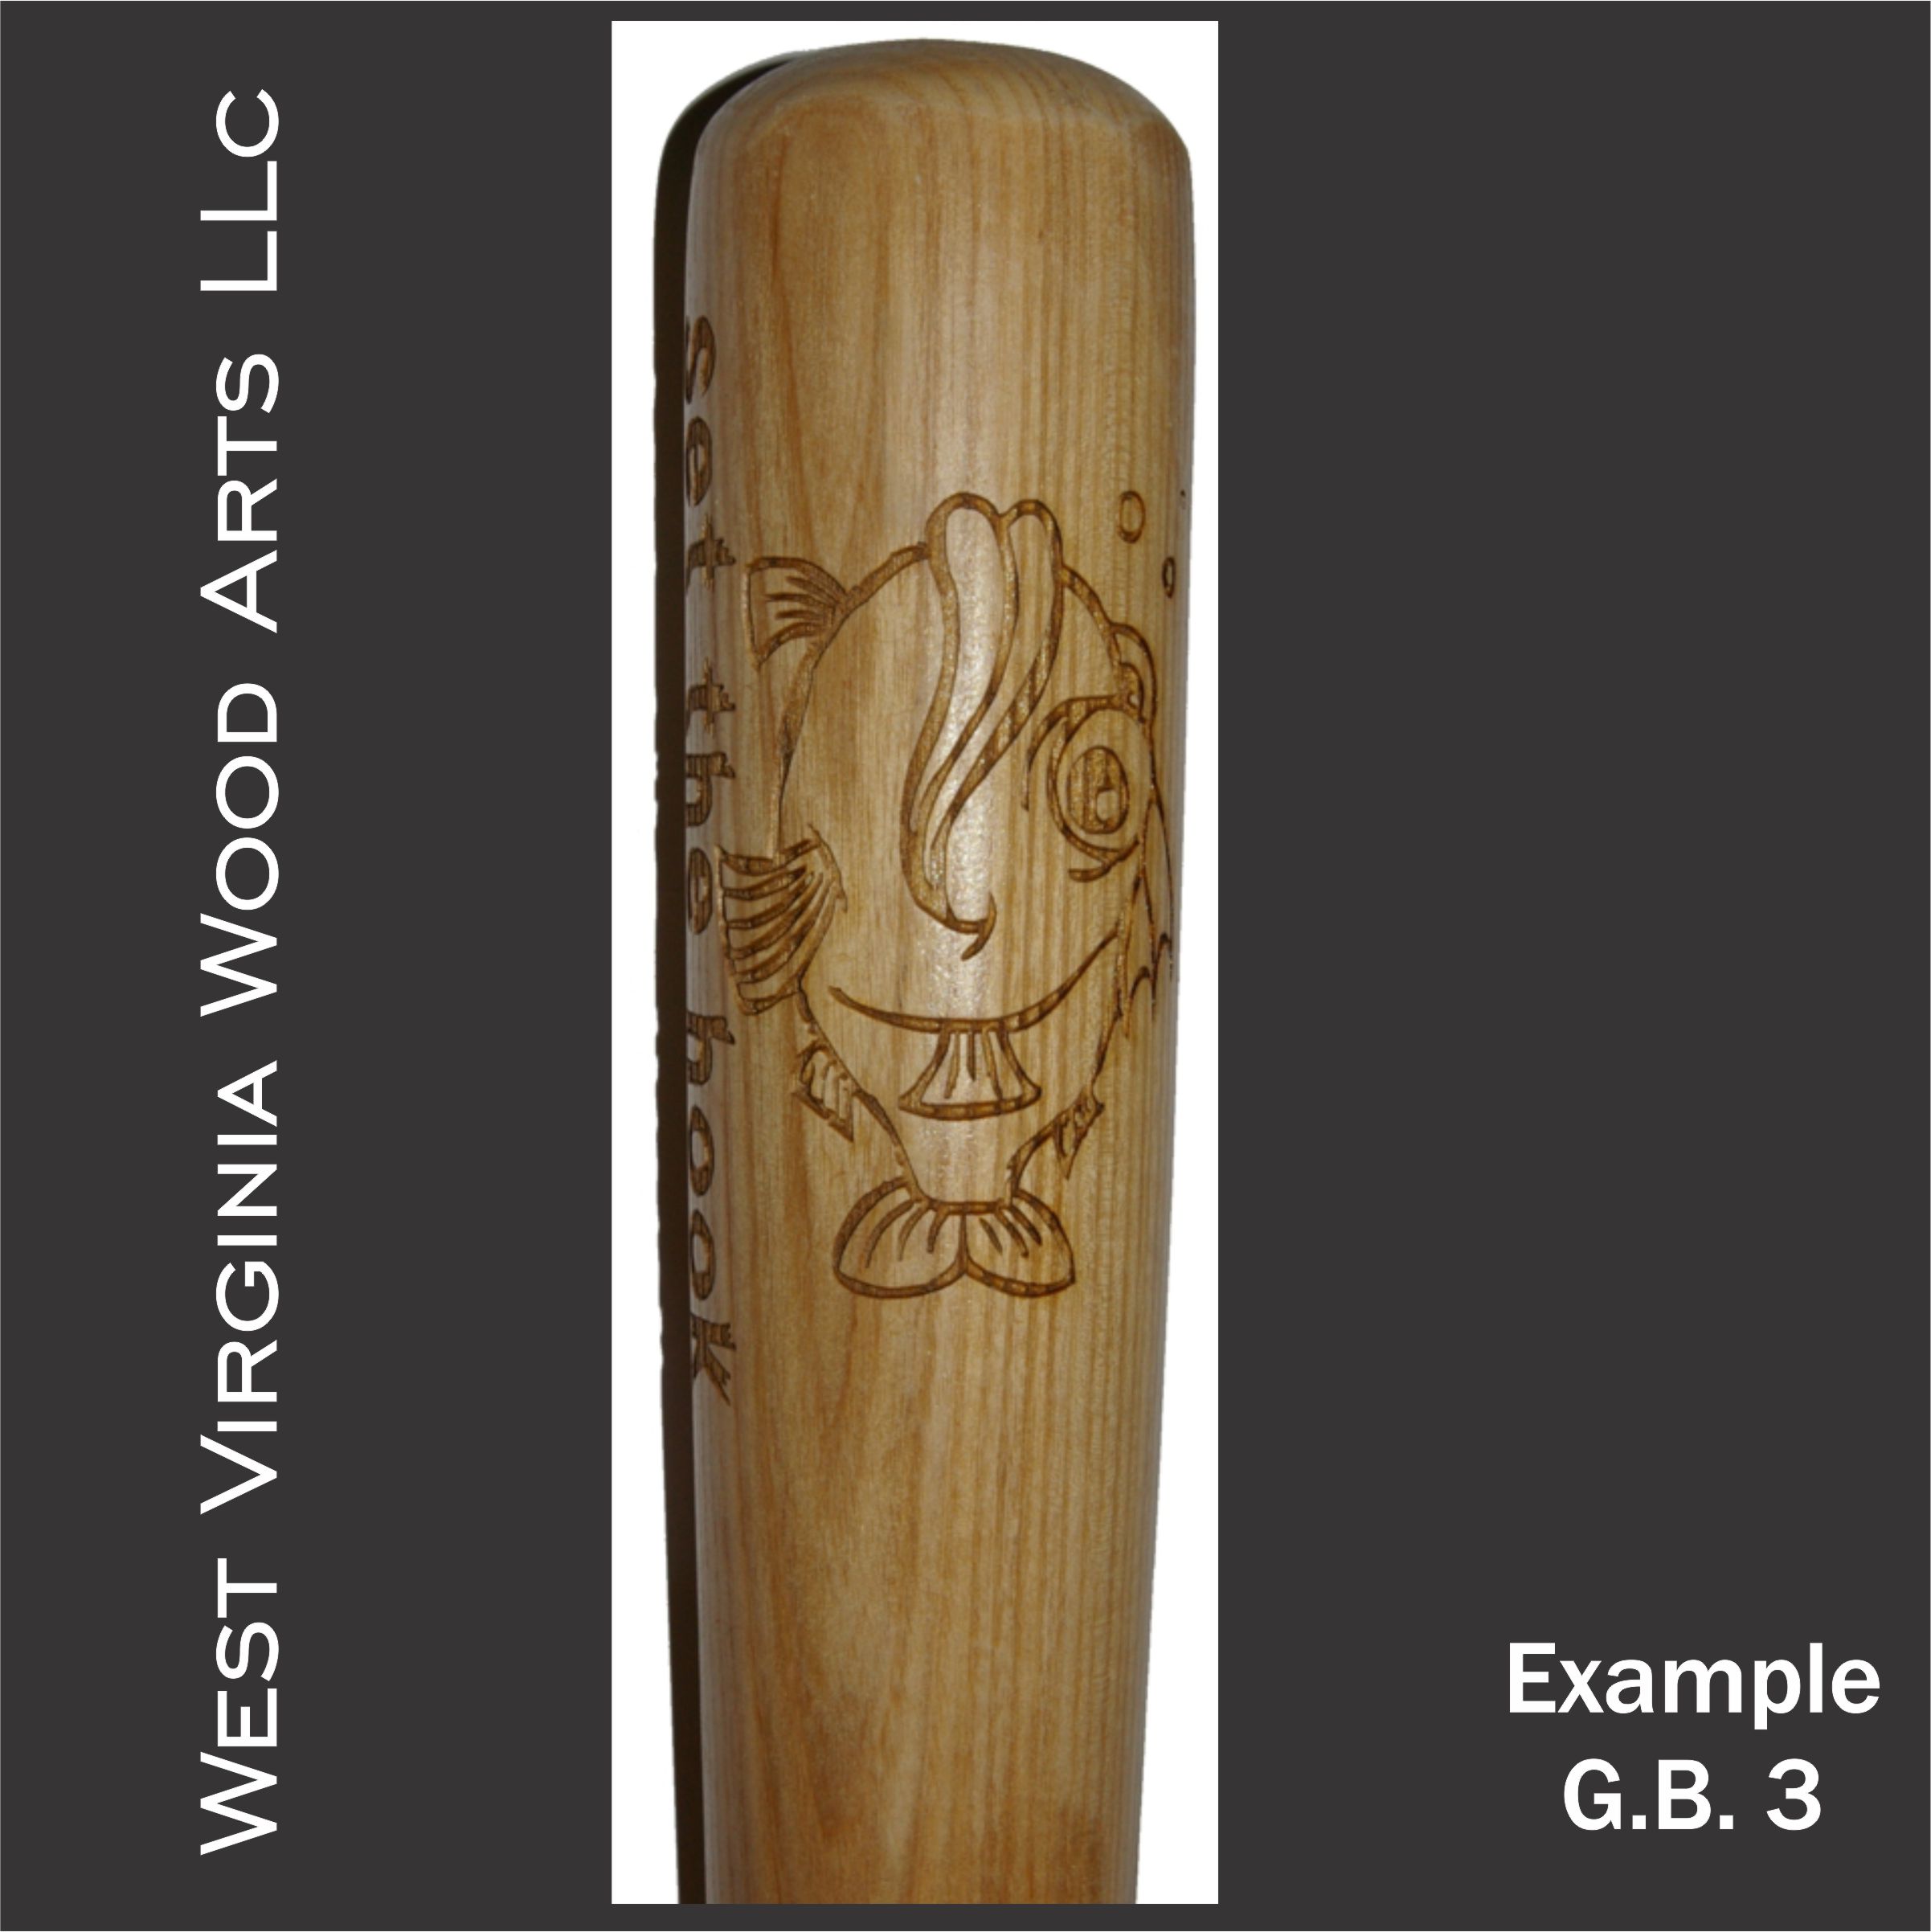 custom graphic engraving and specialized font on groomsman gift baseball bat